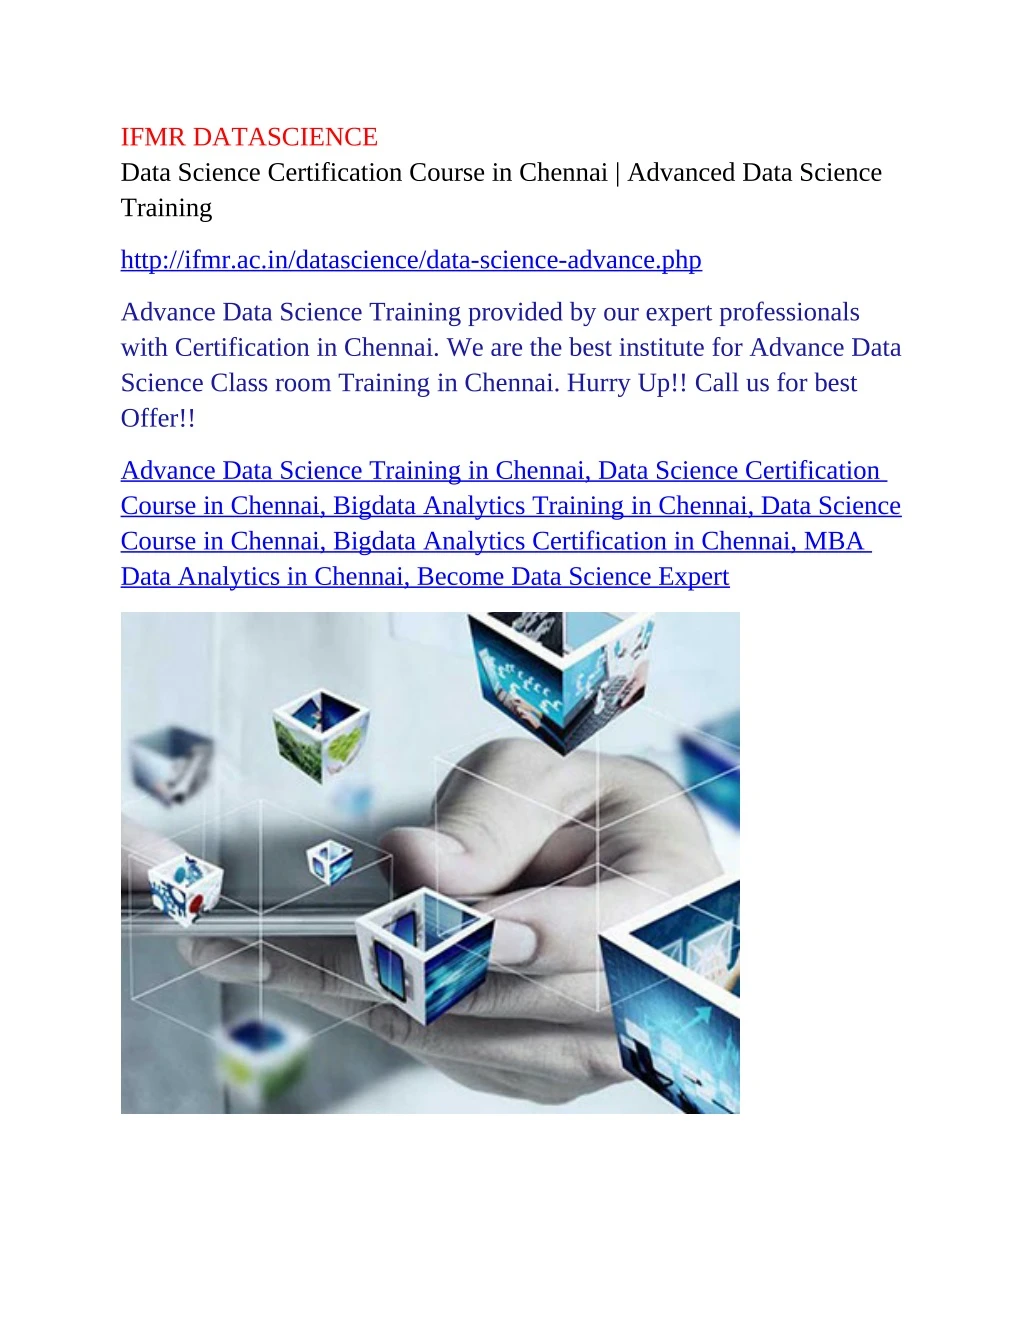 ifmr datascience data science certification